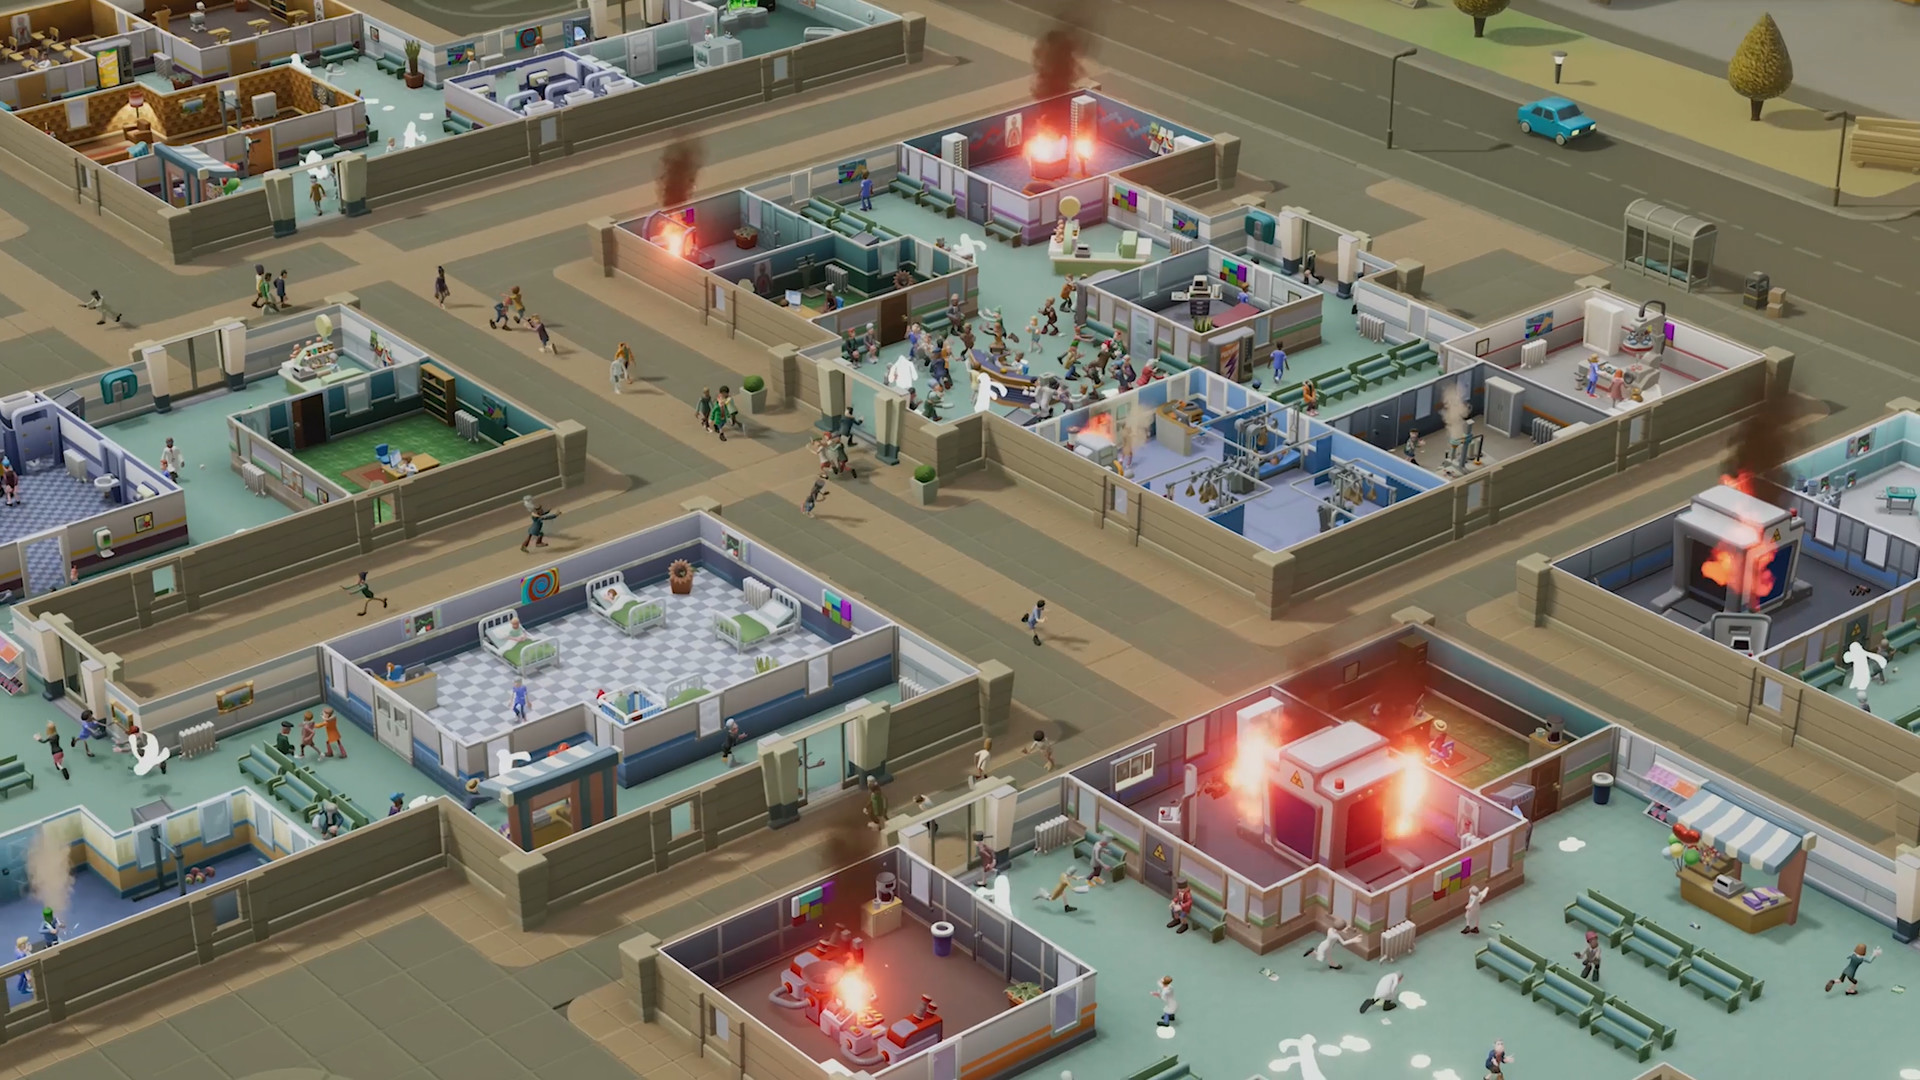 two point hospital switch price